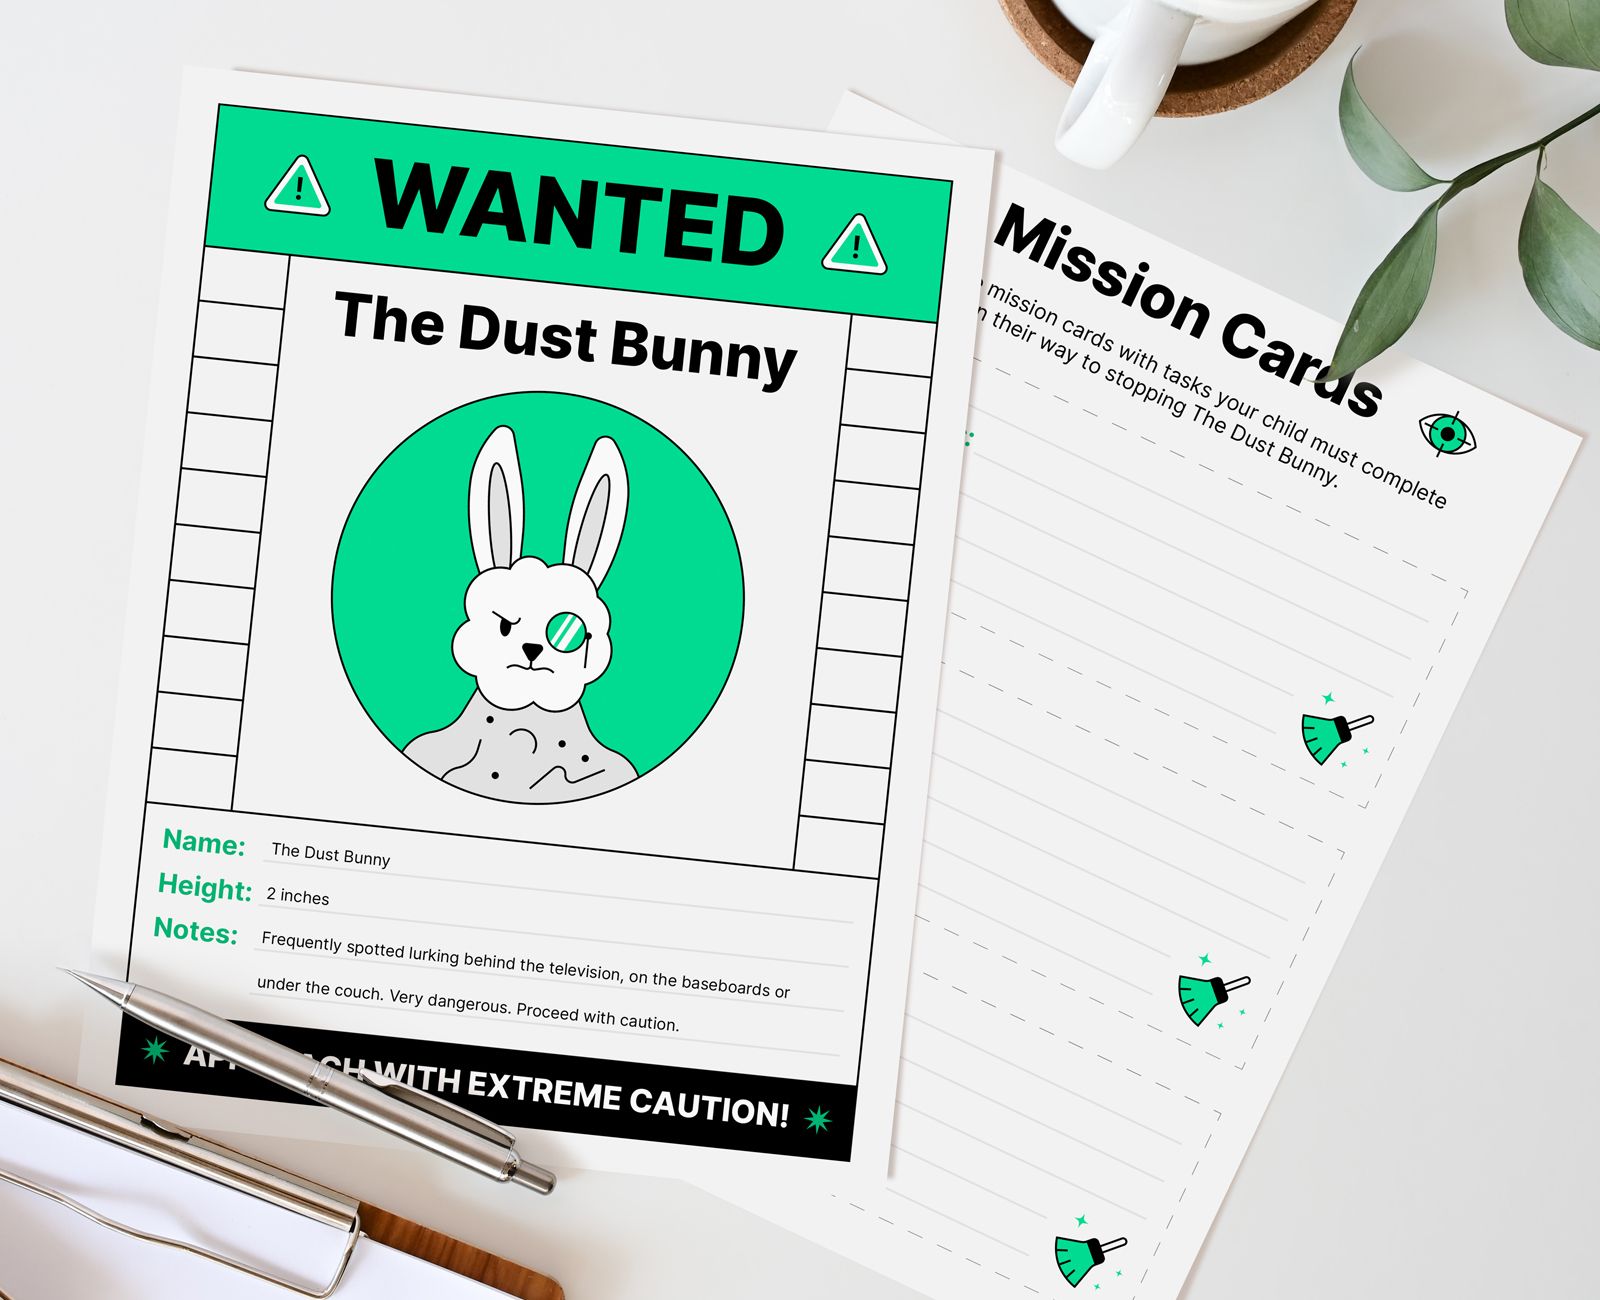 A printable piece of paper with The Dust Bunny written on it sits on a desk.